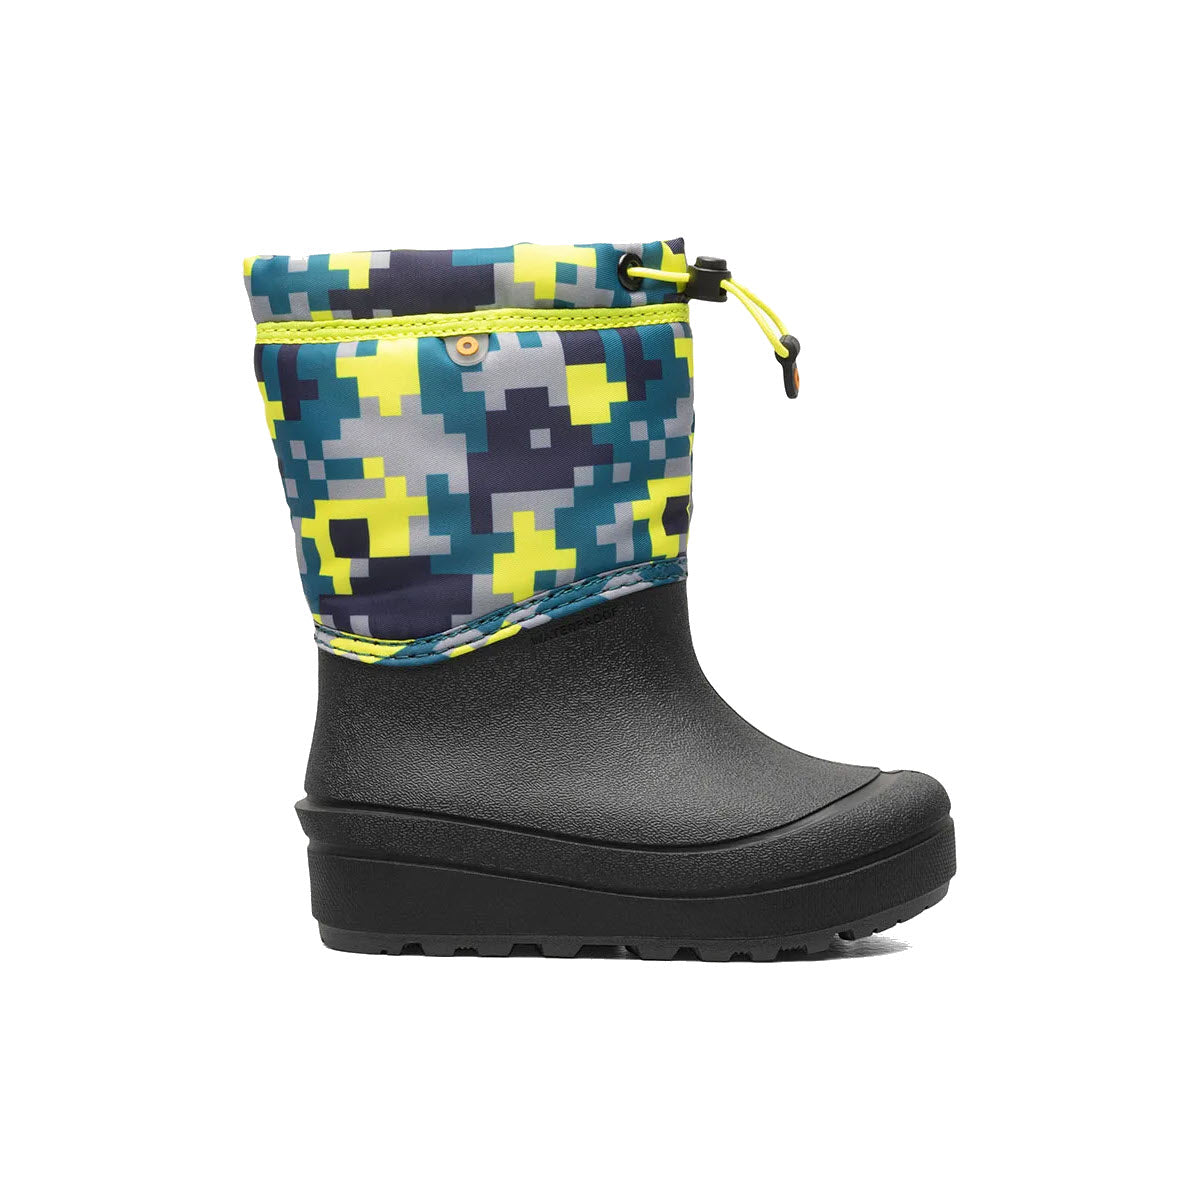 A child's winter boot with a black rubber sole and a colorful pixelated upper pattern in blue, green, and yellow, featuring a waterproof eco-friendly EVA footbed is the BOGS SNOW SHELL MEDIUM CAMO NAVY MULTI - KIDS by Bogs.